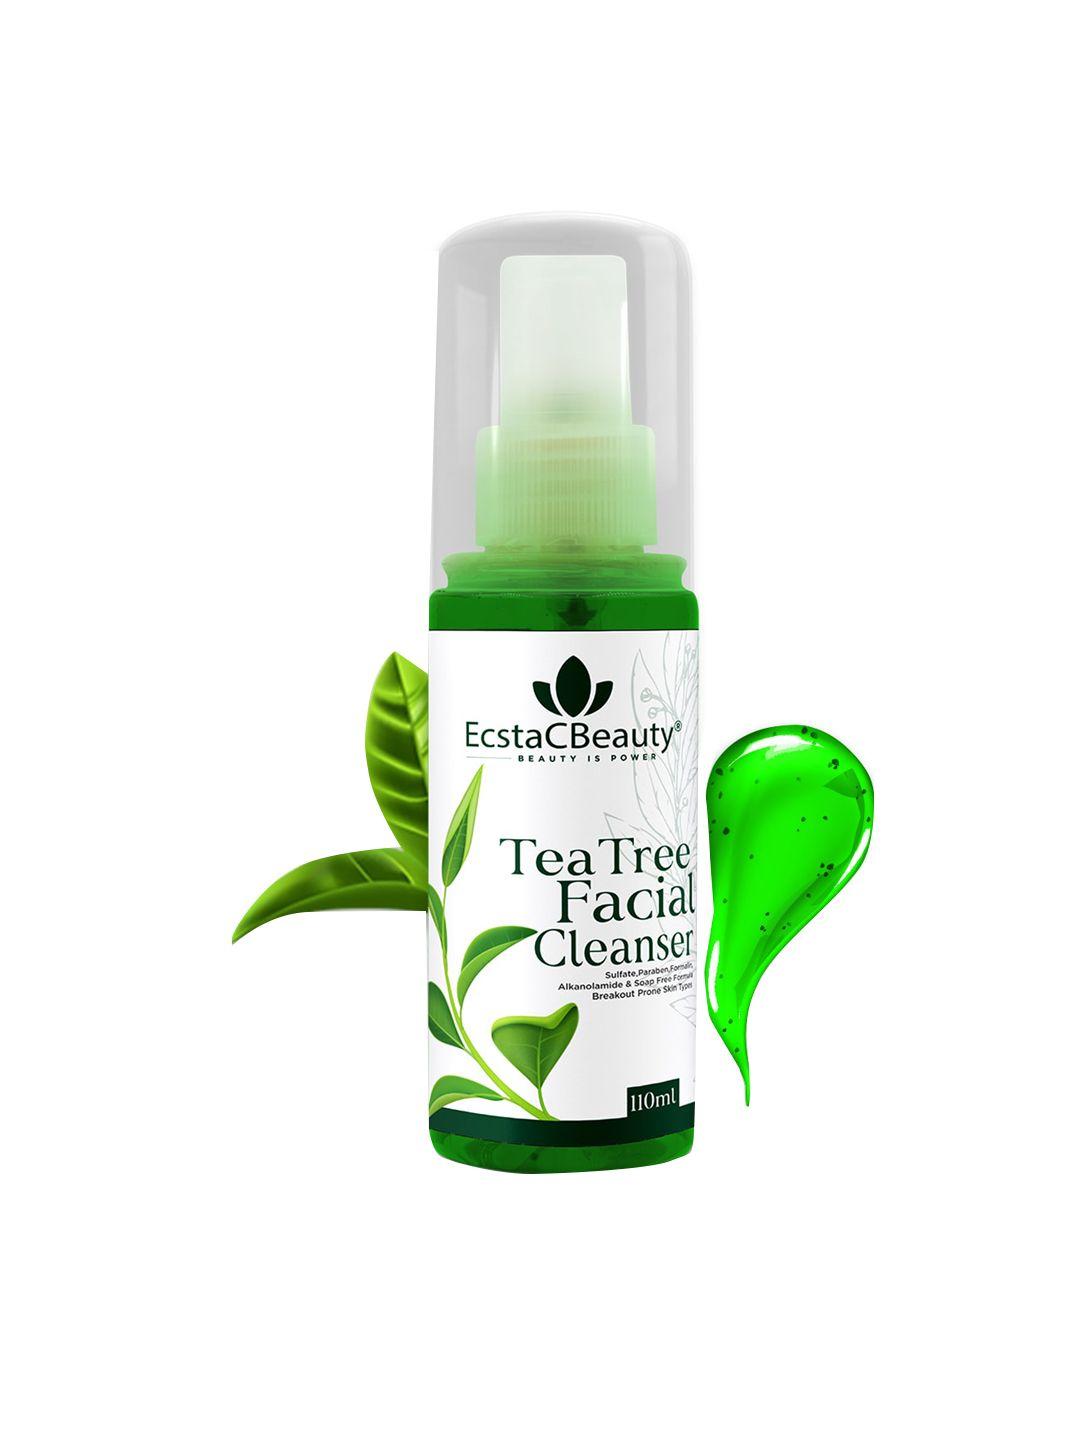 ecstacbeauty natural tea tree facial cleanser with rosemary & maychang - 110 ml